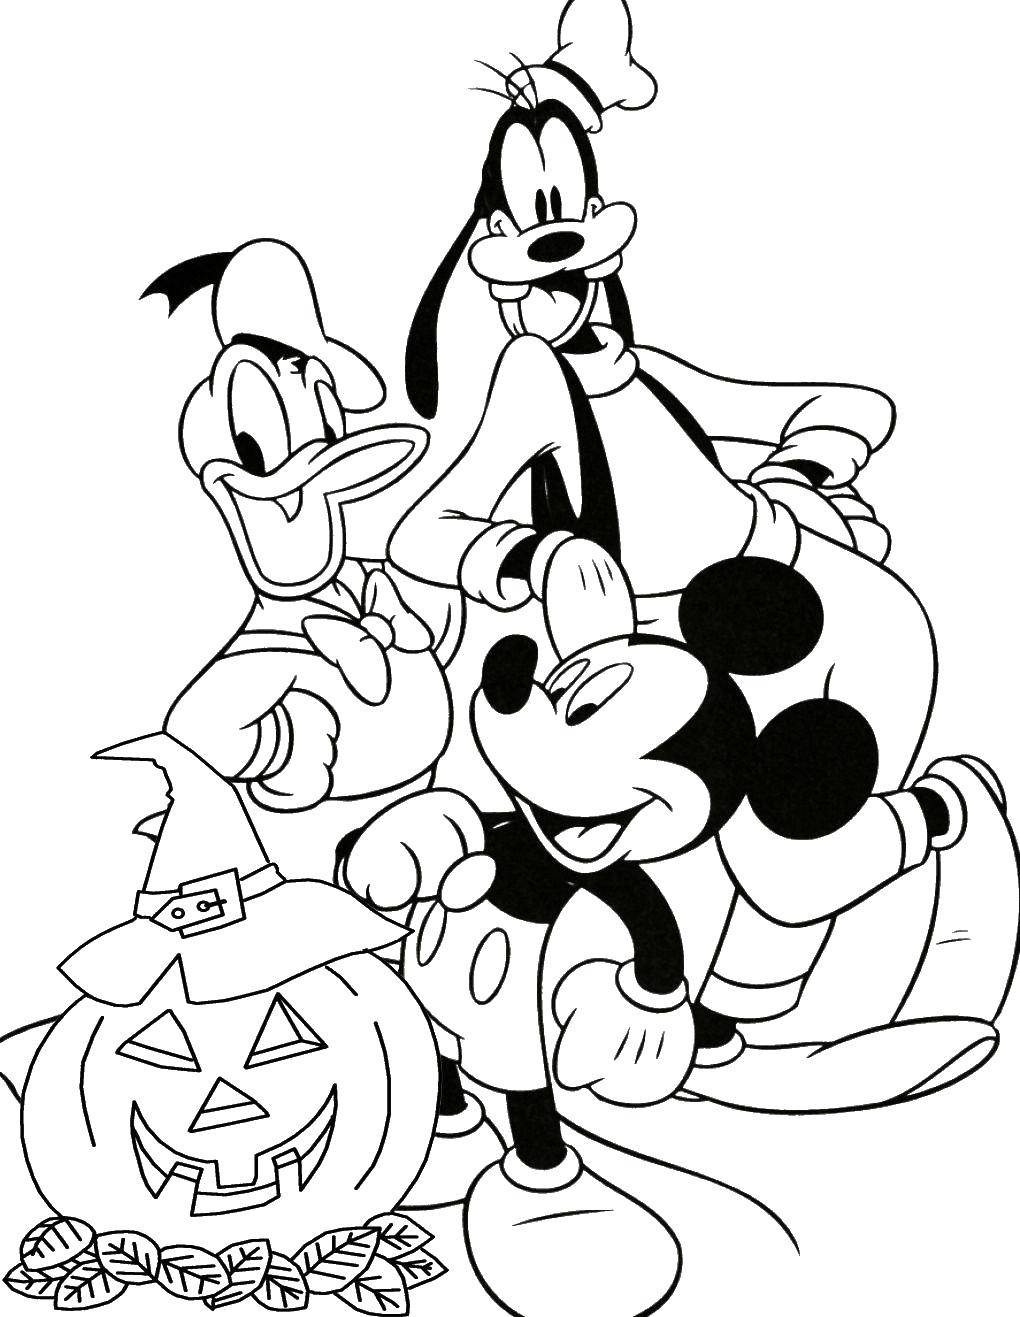 Coloring Mickey mouse, Donald and goofy. Category Disney coloring pages. Tags:  Disney, Mickey Mouse, Donald Duck, Goofy.